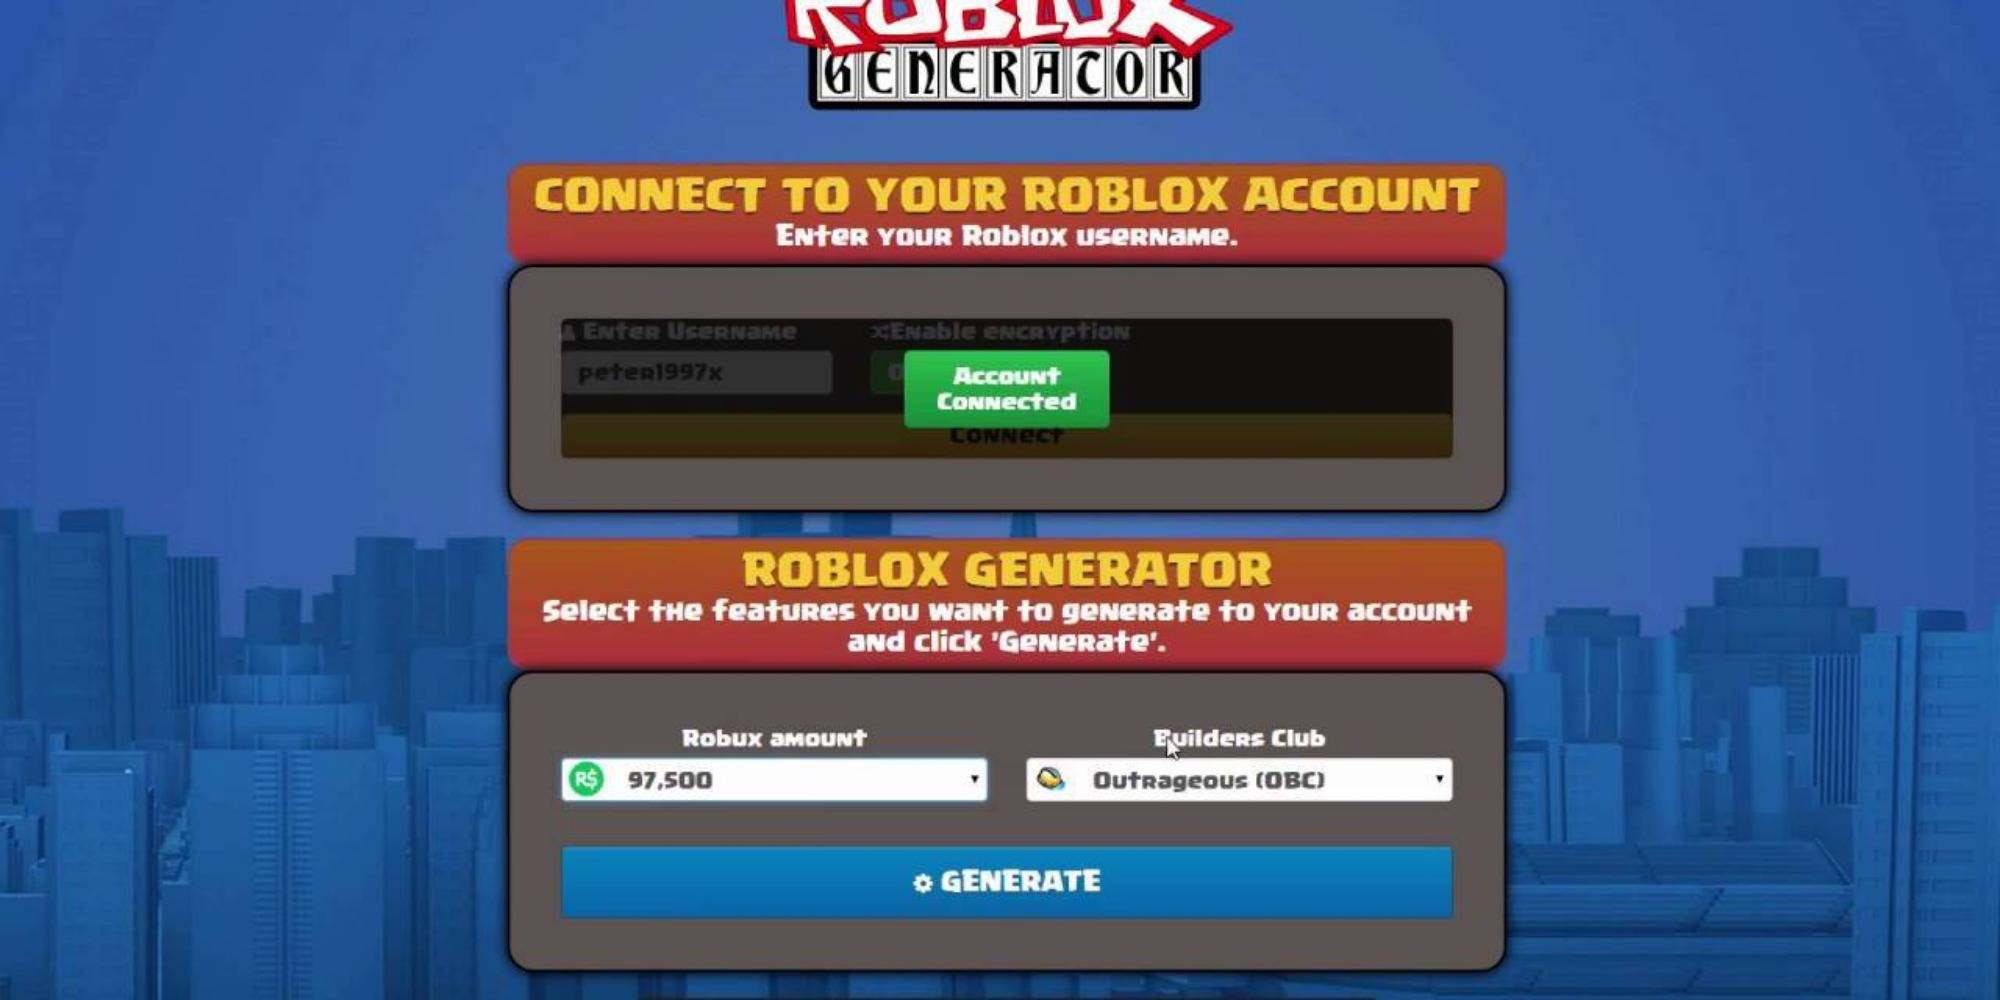 Roblox Easy Ways To Get Robux - ways to earn robux on roblox